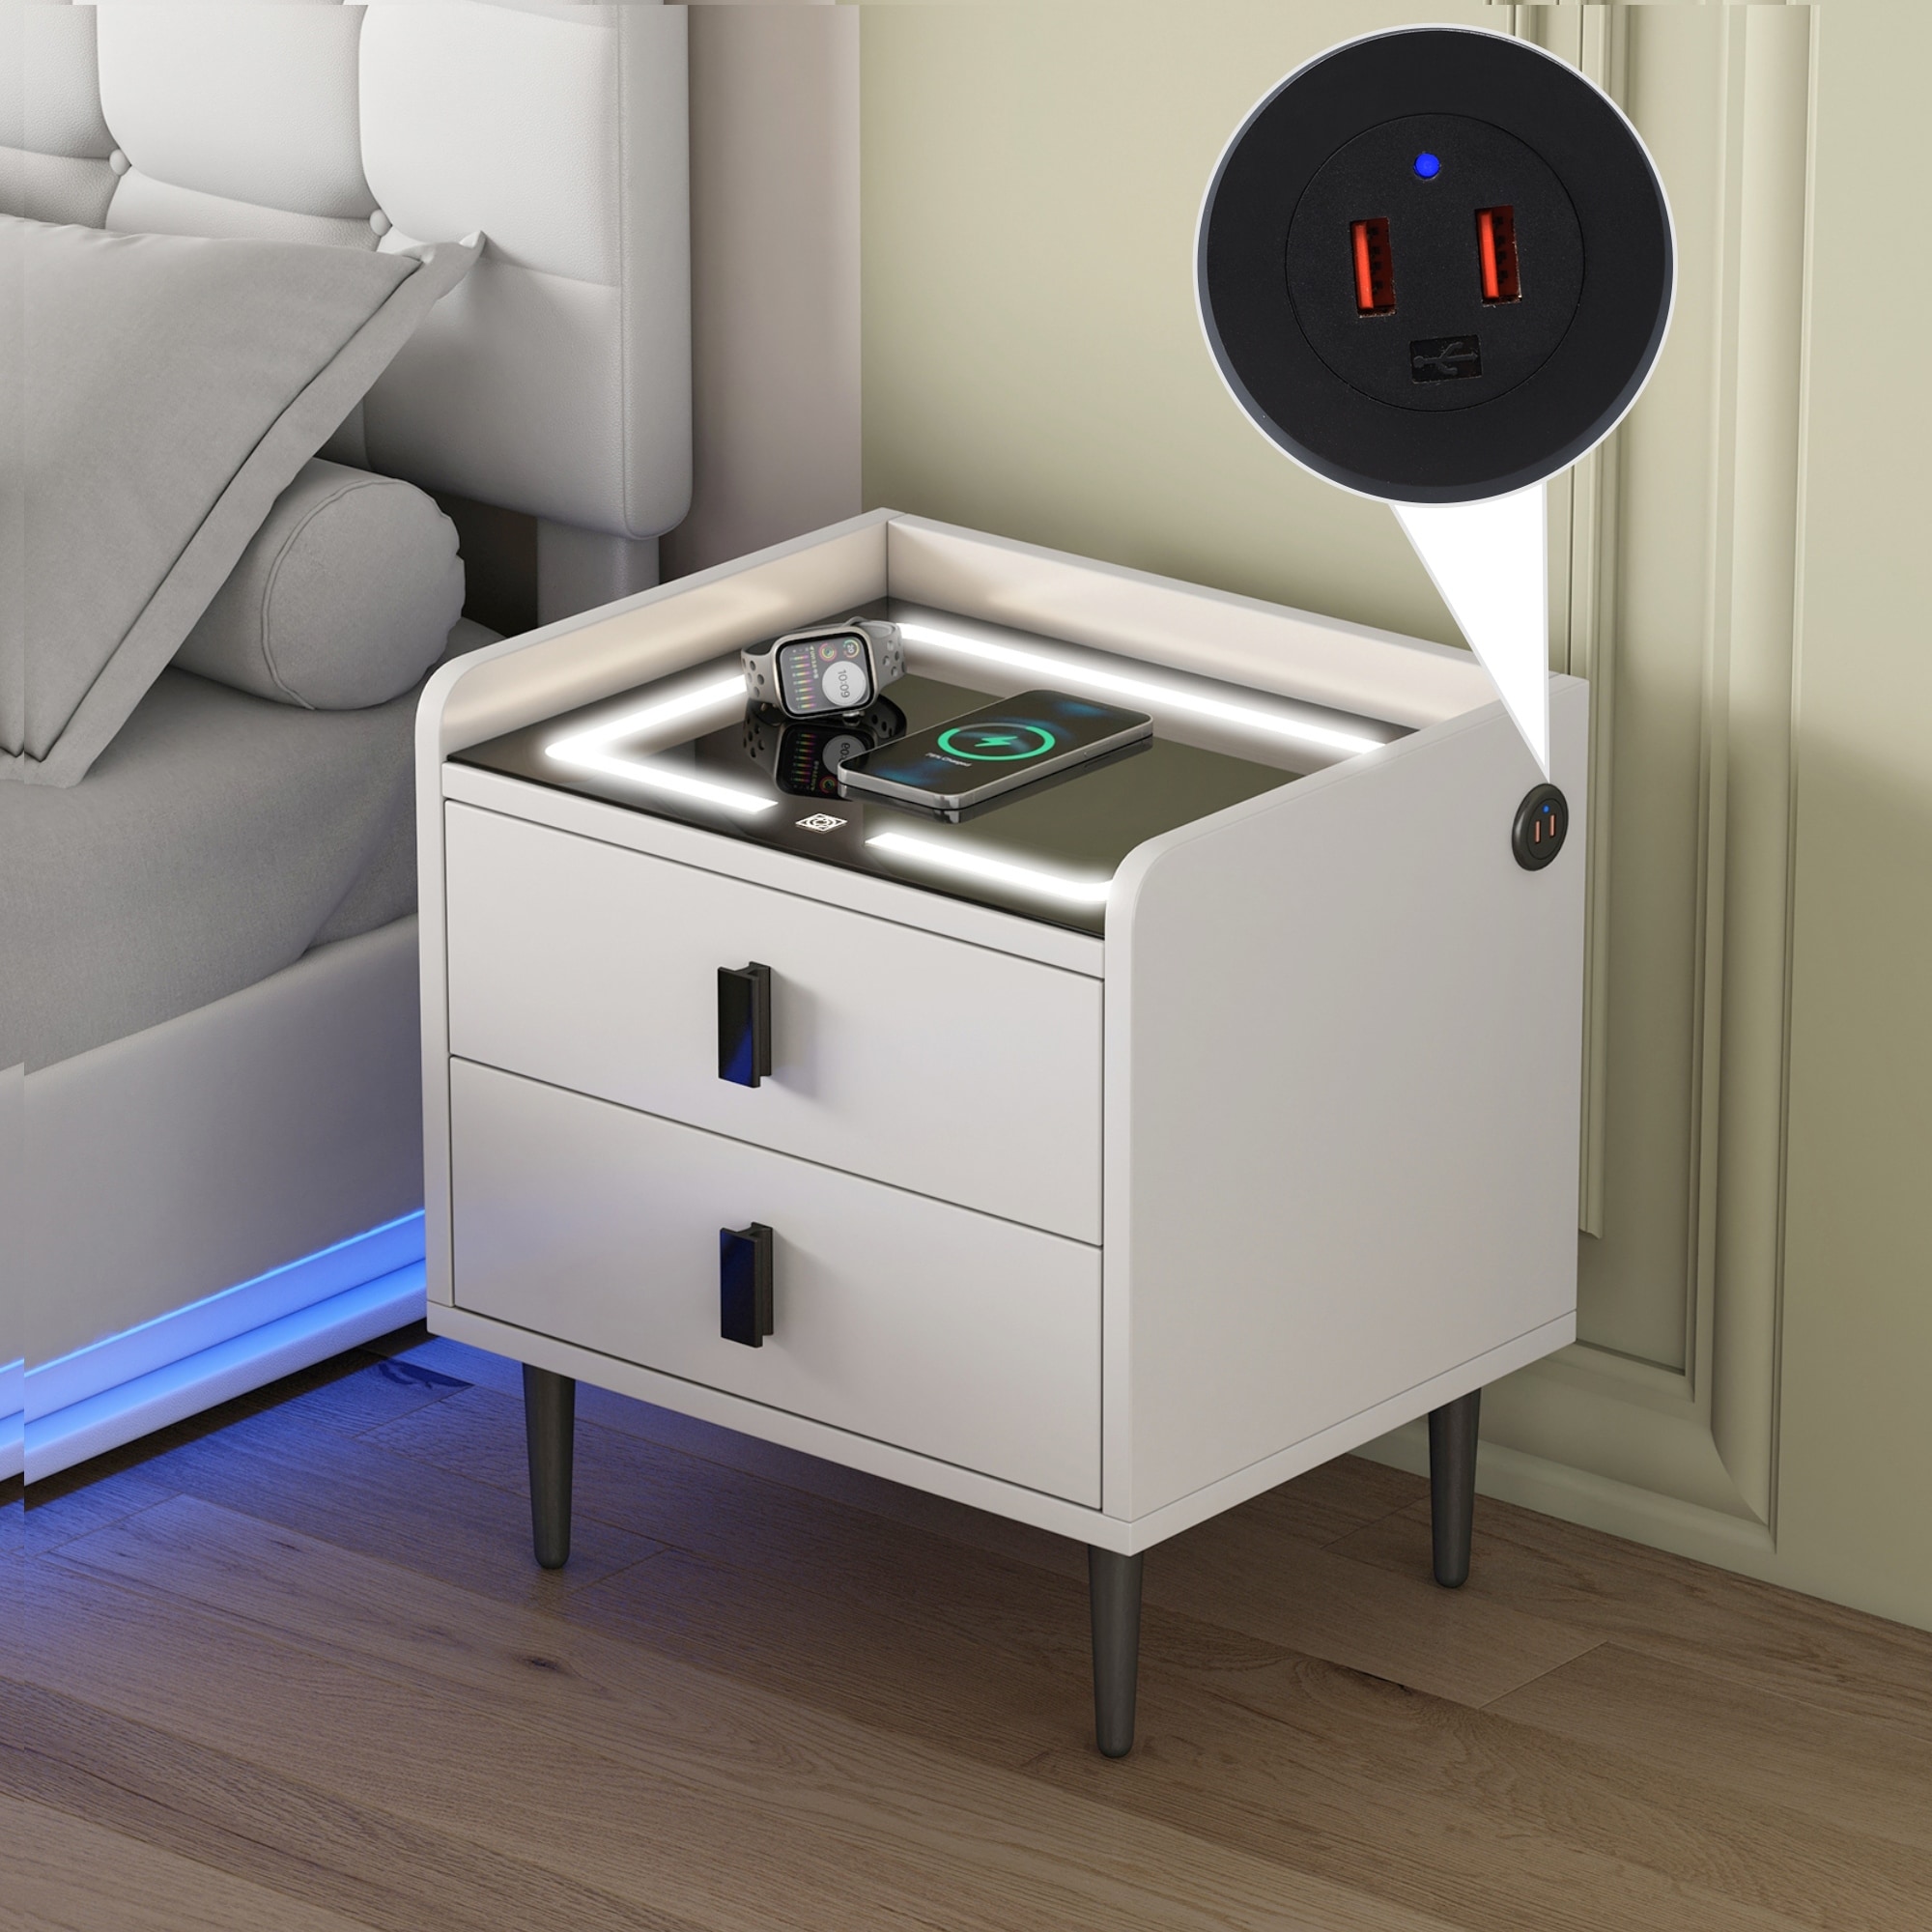 Bedroom Mini Table and Nightstand with Inside Fridge and Wireless Charger -  China Bedside Table, Smart Touch Table